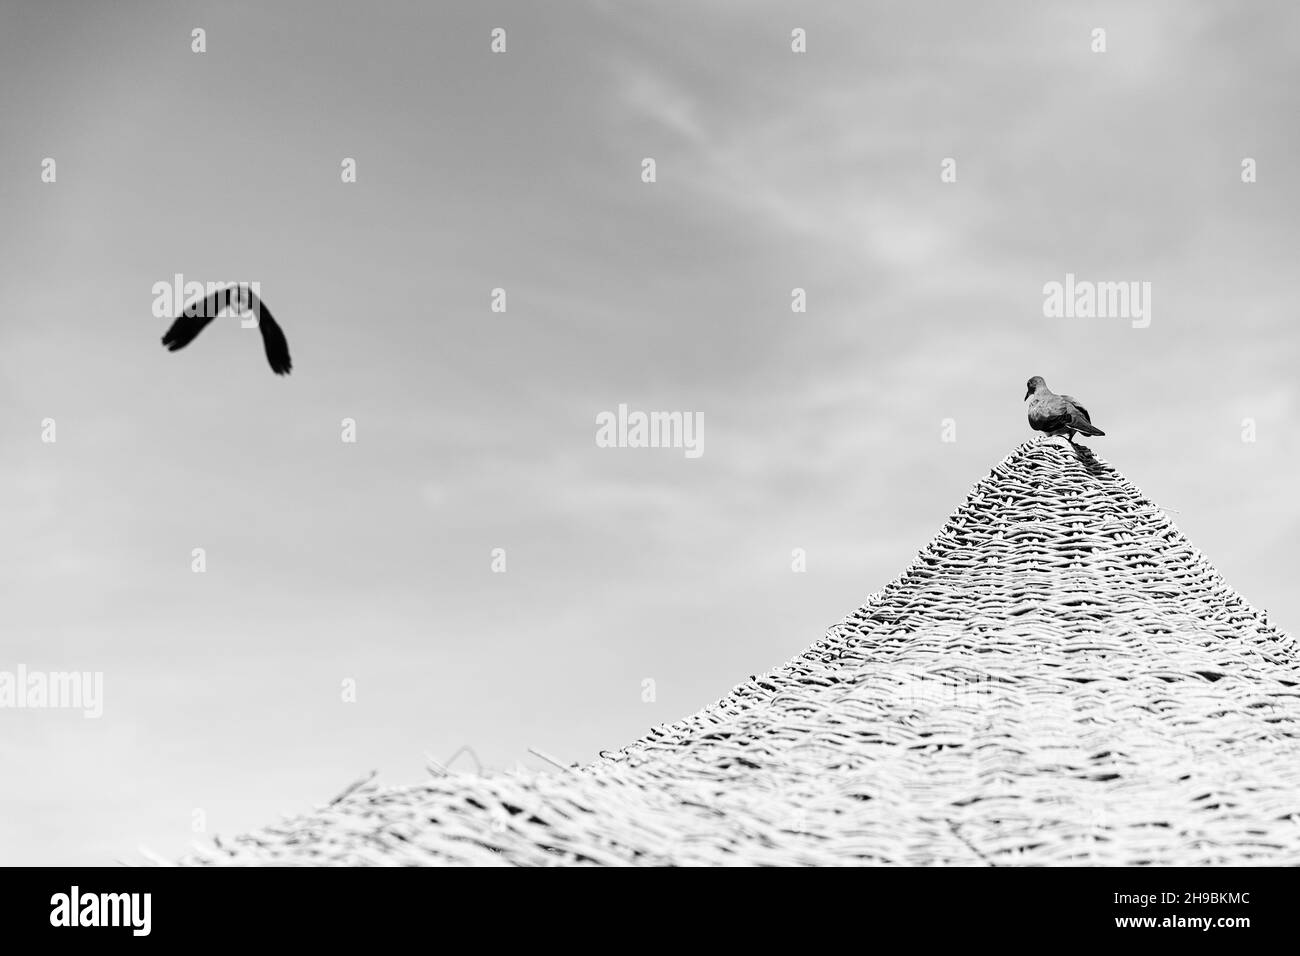 Black-white photography. Bird sit at straw umbrella or thatched hut at beach Stock Photo